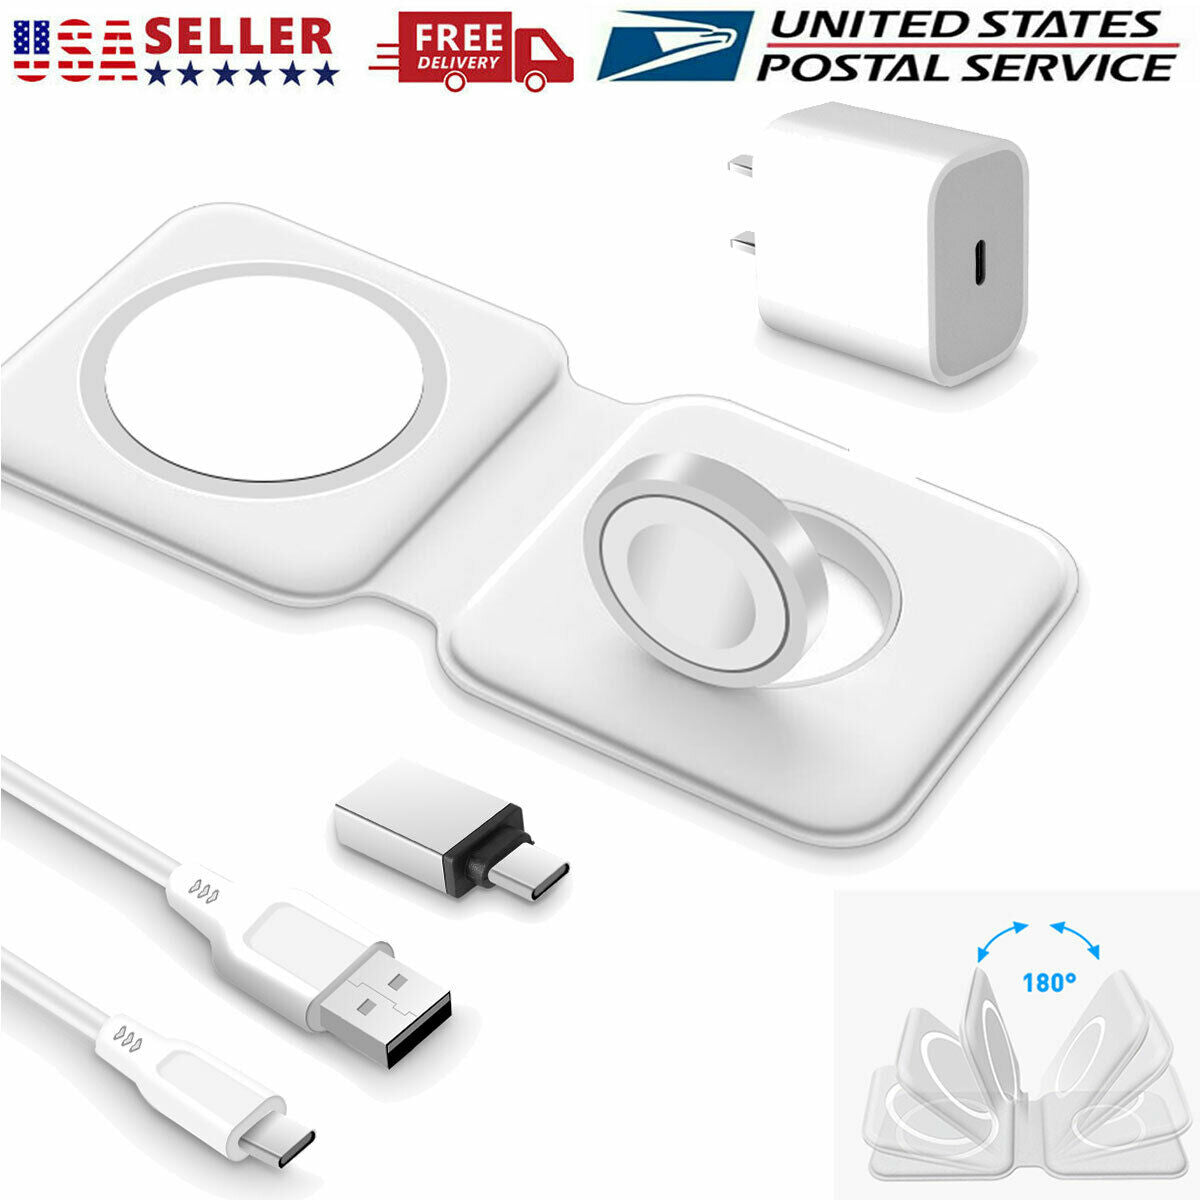 MagSafe Duo Charger Charging Station Pad for iPhone 12/13 and iWatch